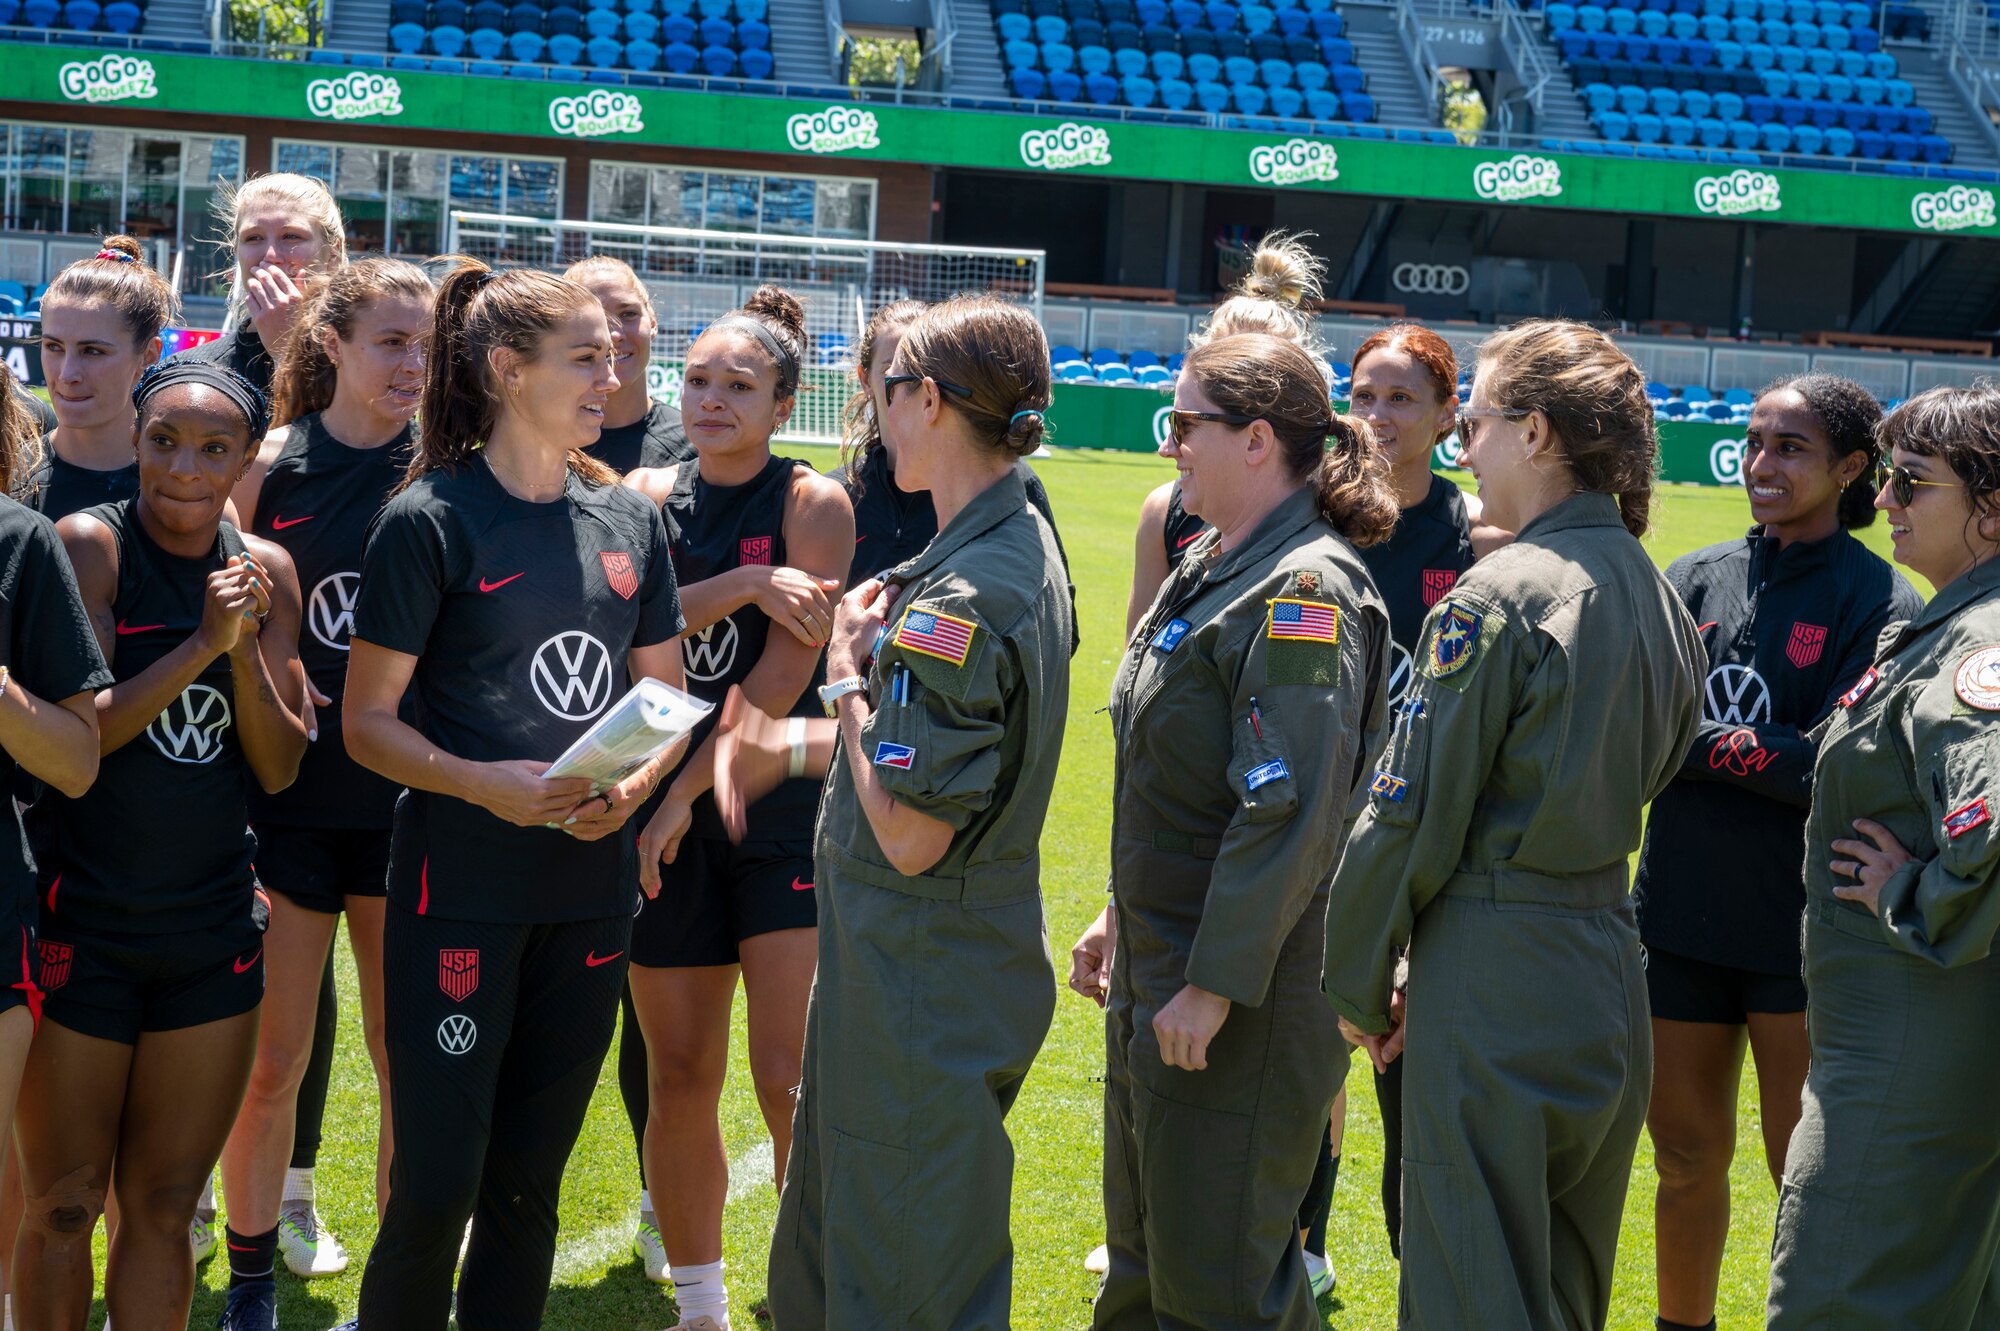 Members from the 412th Operations Group chat with U.S. Women's National Team players during a practice day July 8. Team Edwards sent an all female crew from the 412th Operations Group to conduct a special flyover for the National Women's Soccer League at PayPal Park, July 9 in San Jose, California.